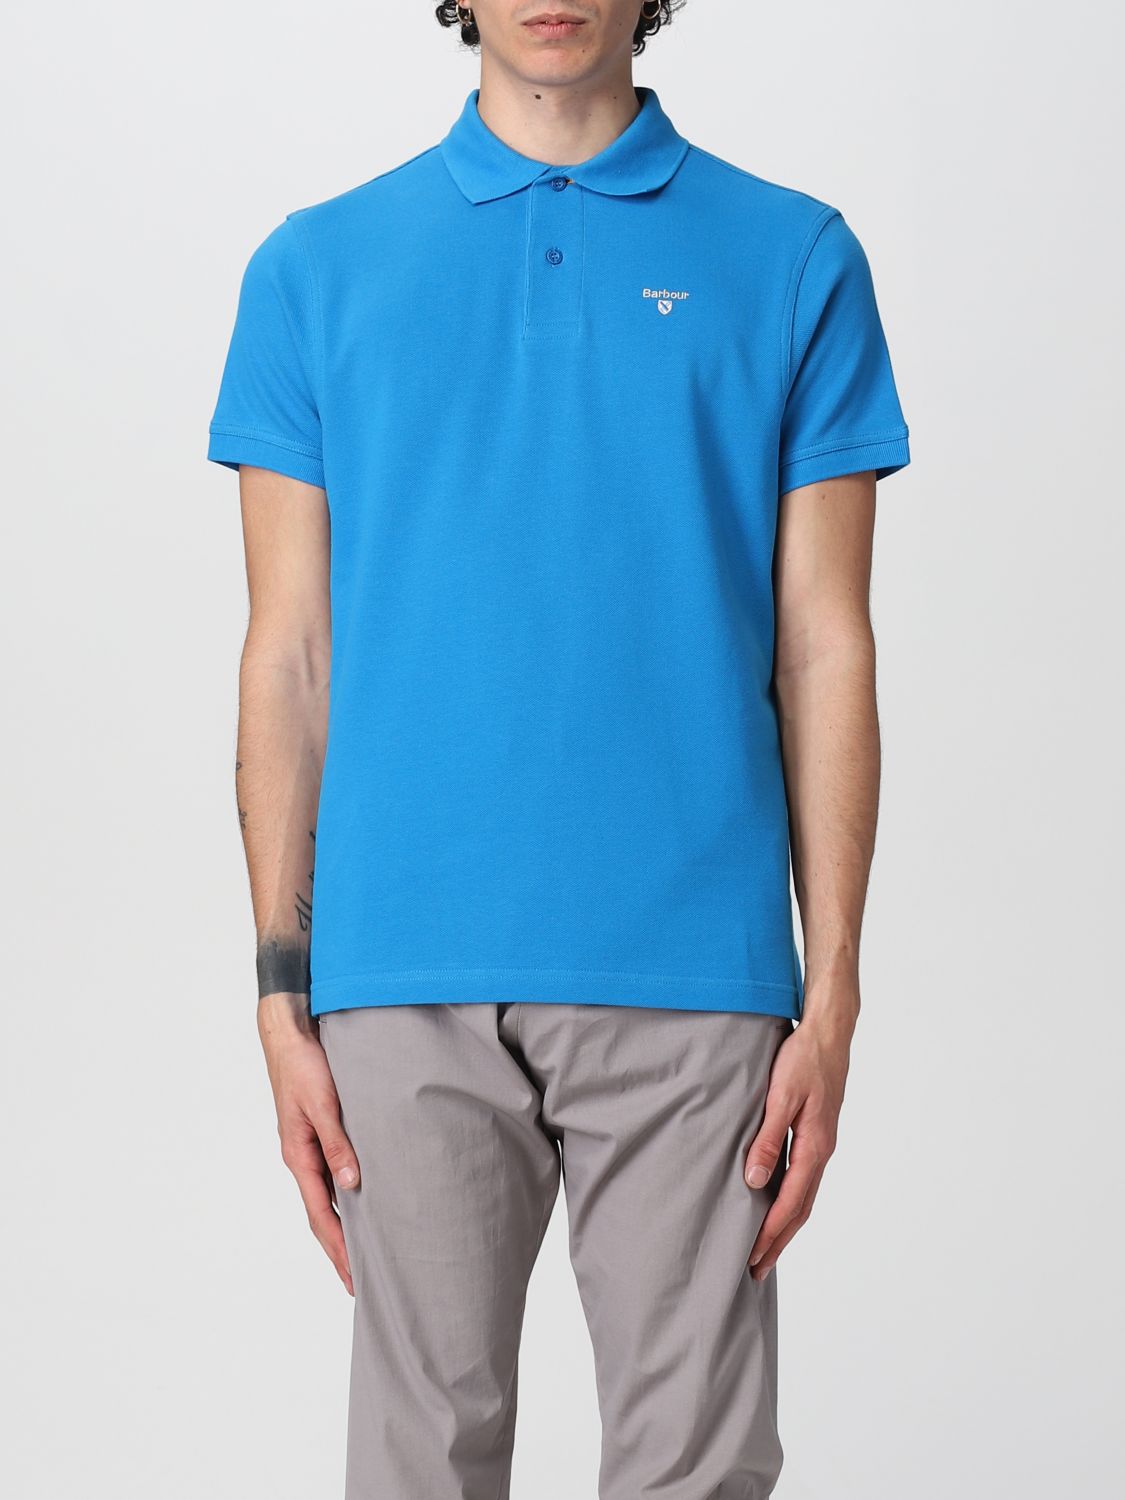 BARBOUR: polo shirt for man - | Barbour polo shirt MML0358 at GIGLIO.COM